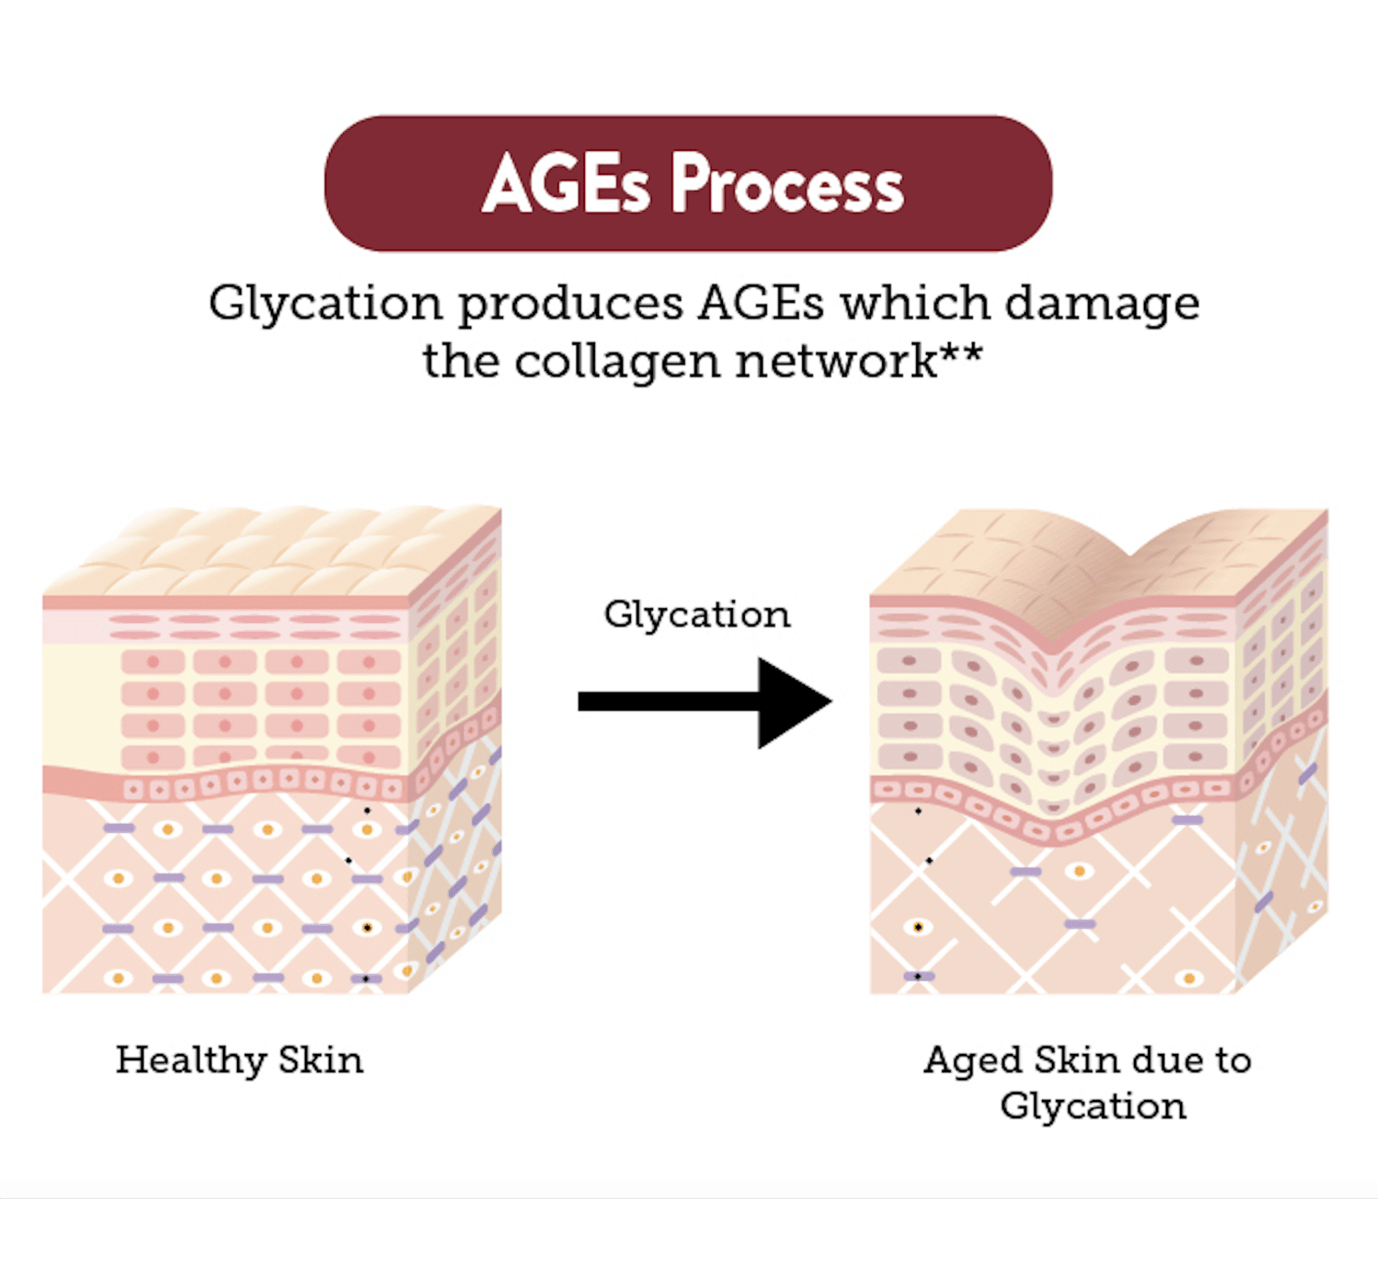 An antiglycation infographic showing how glycation ages skin